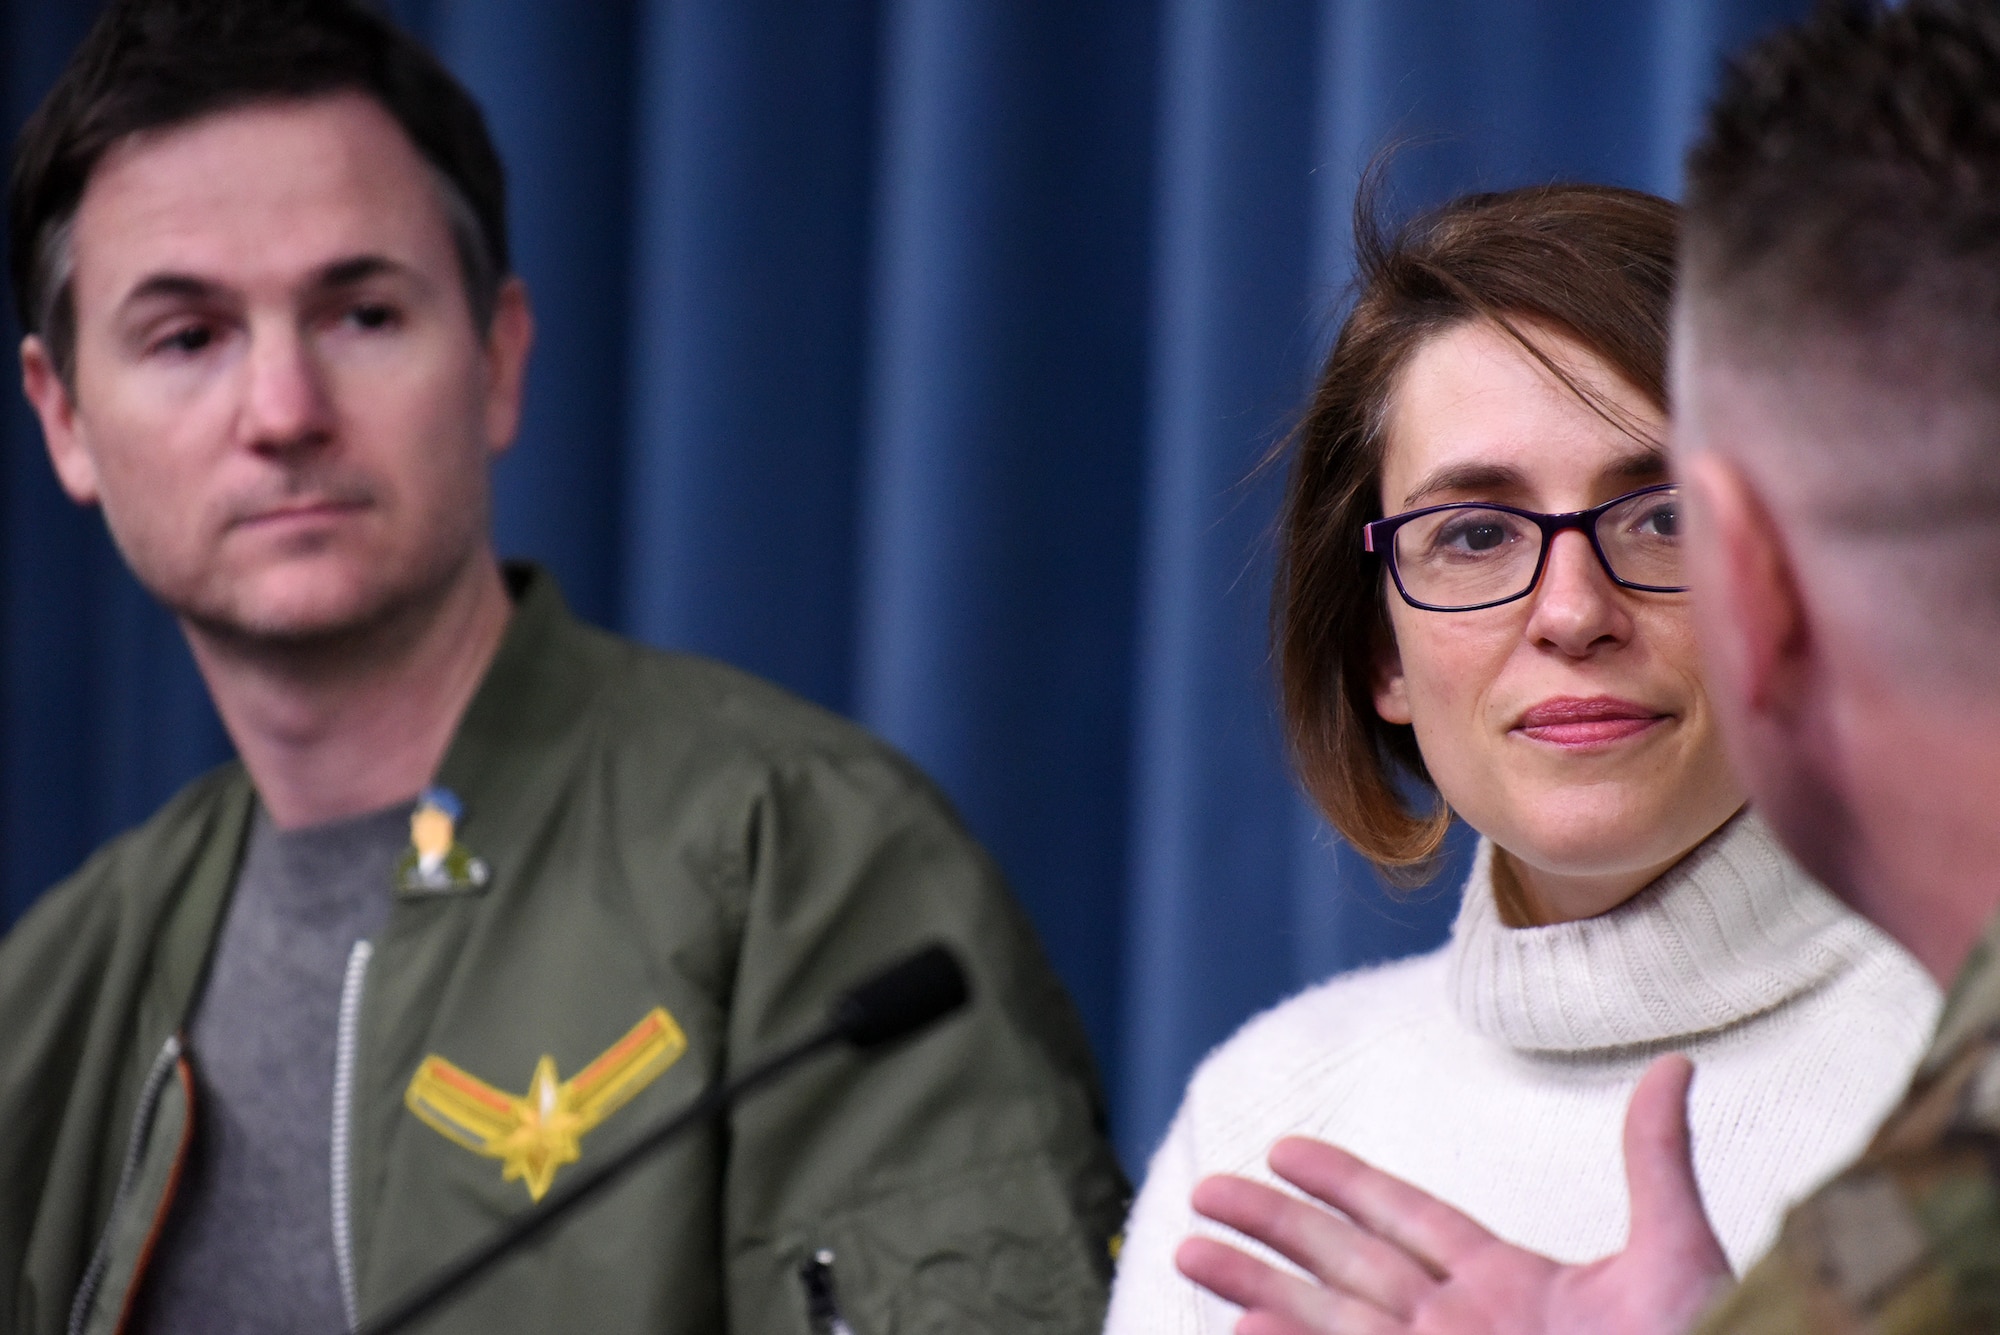 Anna Boden and Ryan Flack, “Captain Marvel” co-directors, answer questions during a round table at the Pentagon, Arlington, Va., March 7, 2019. The media round table was one of many events held as an outreach event targeting Air Force families, congressional representatives and select organizations. (U.S. Air Force photo by Staff Sgt. Rusty Frank)